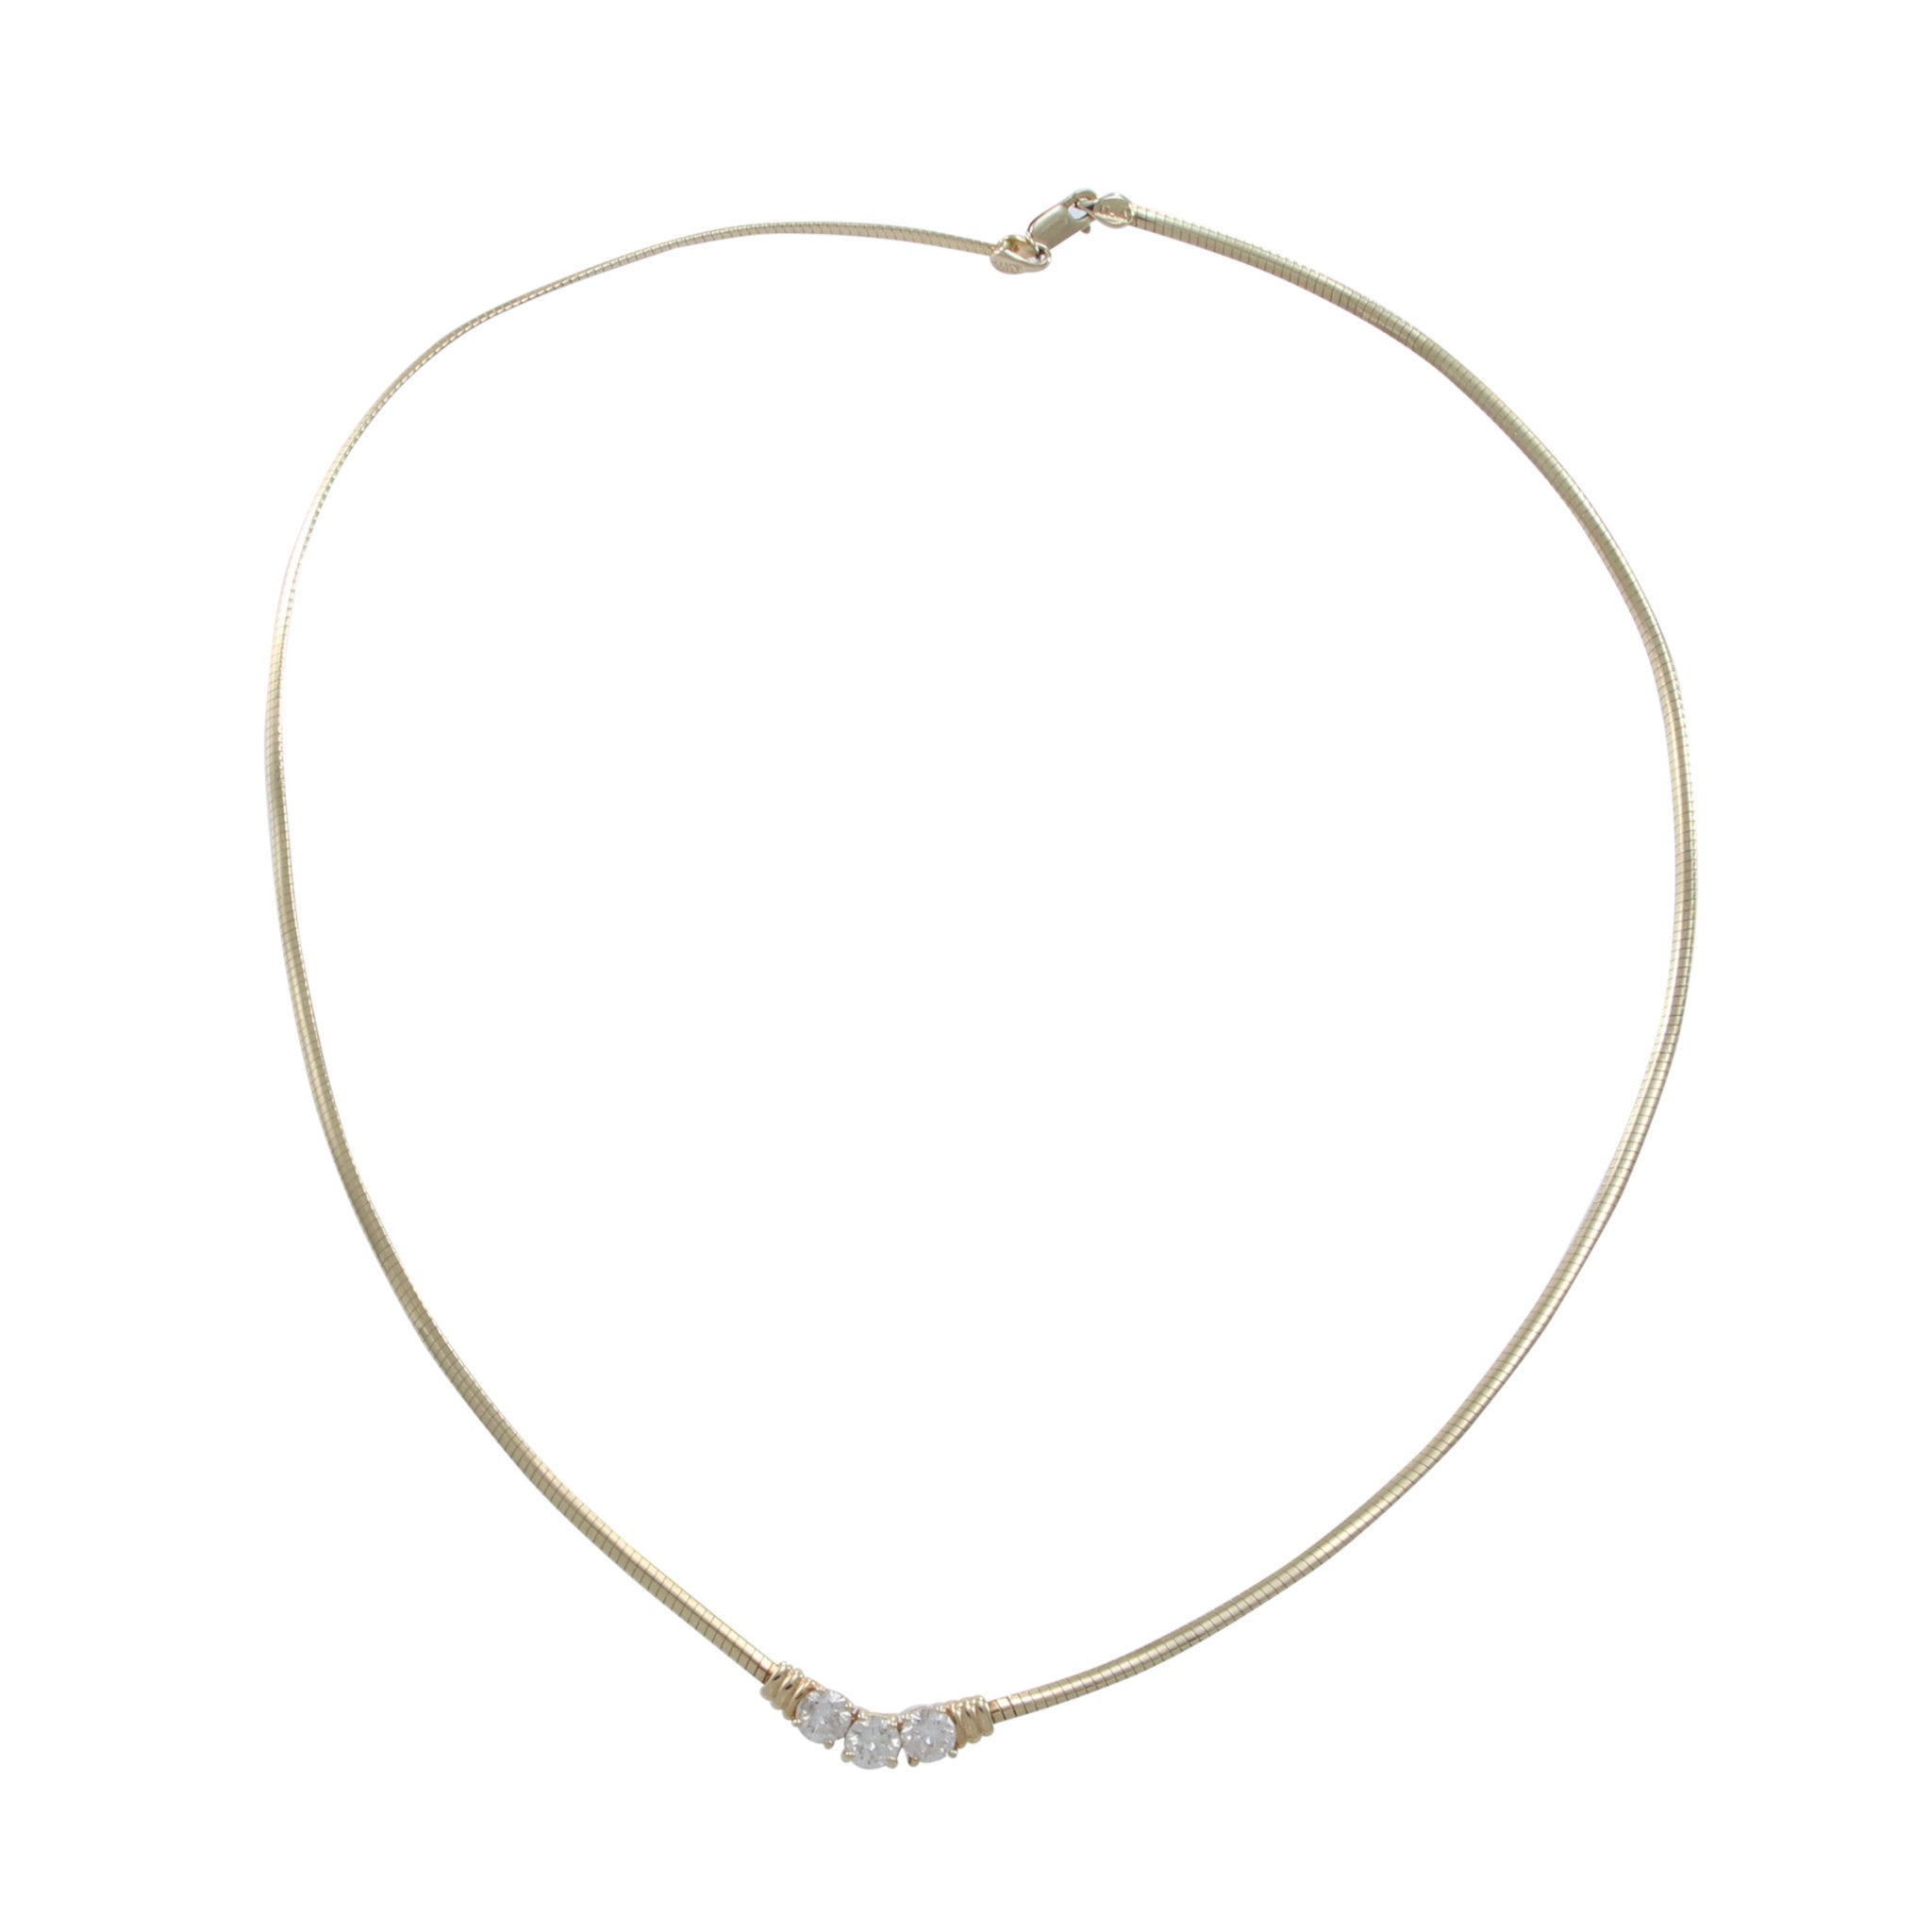 3 CT Round Diamond Halo Necklace in Yellow Gold | Lee Michaels Fine Jewelry